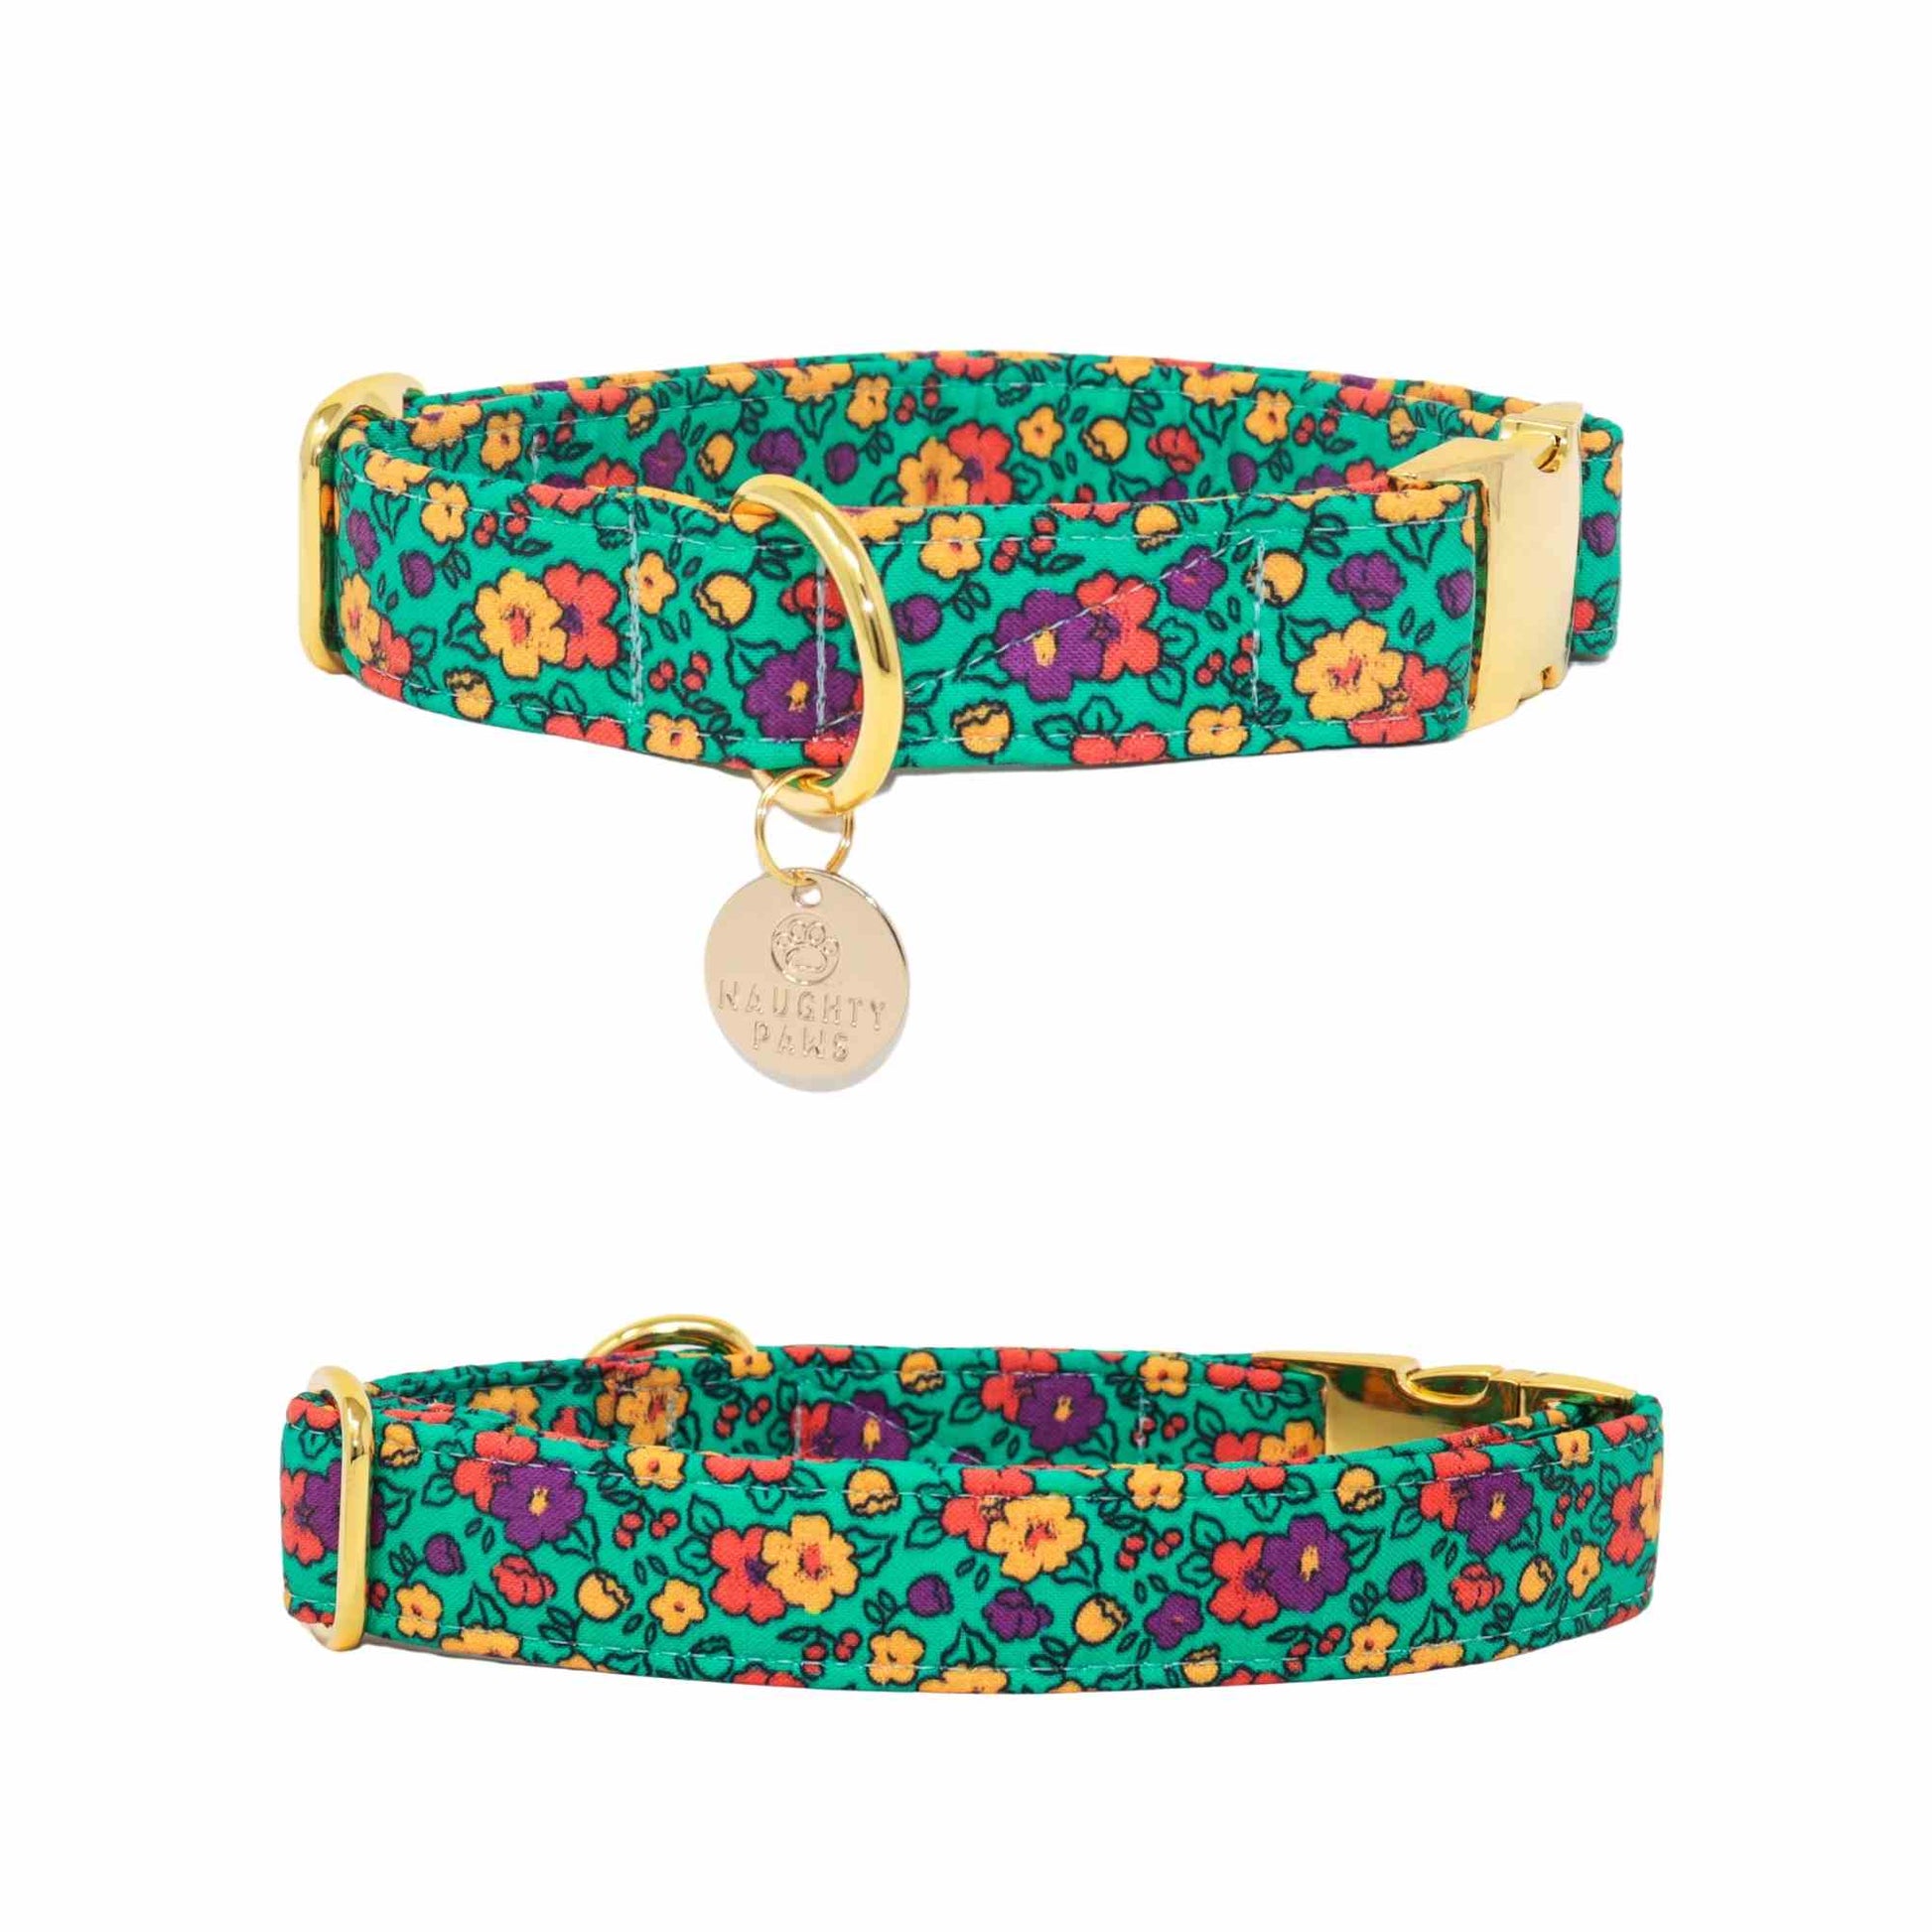 "Summer Field" Handmade Green Vibrant Floral Girl - Female Dog Collar - Stylish and Durable Accessory for Your Pup"